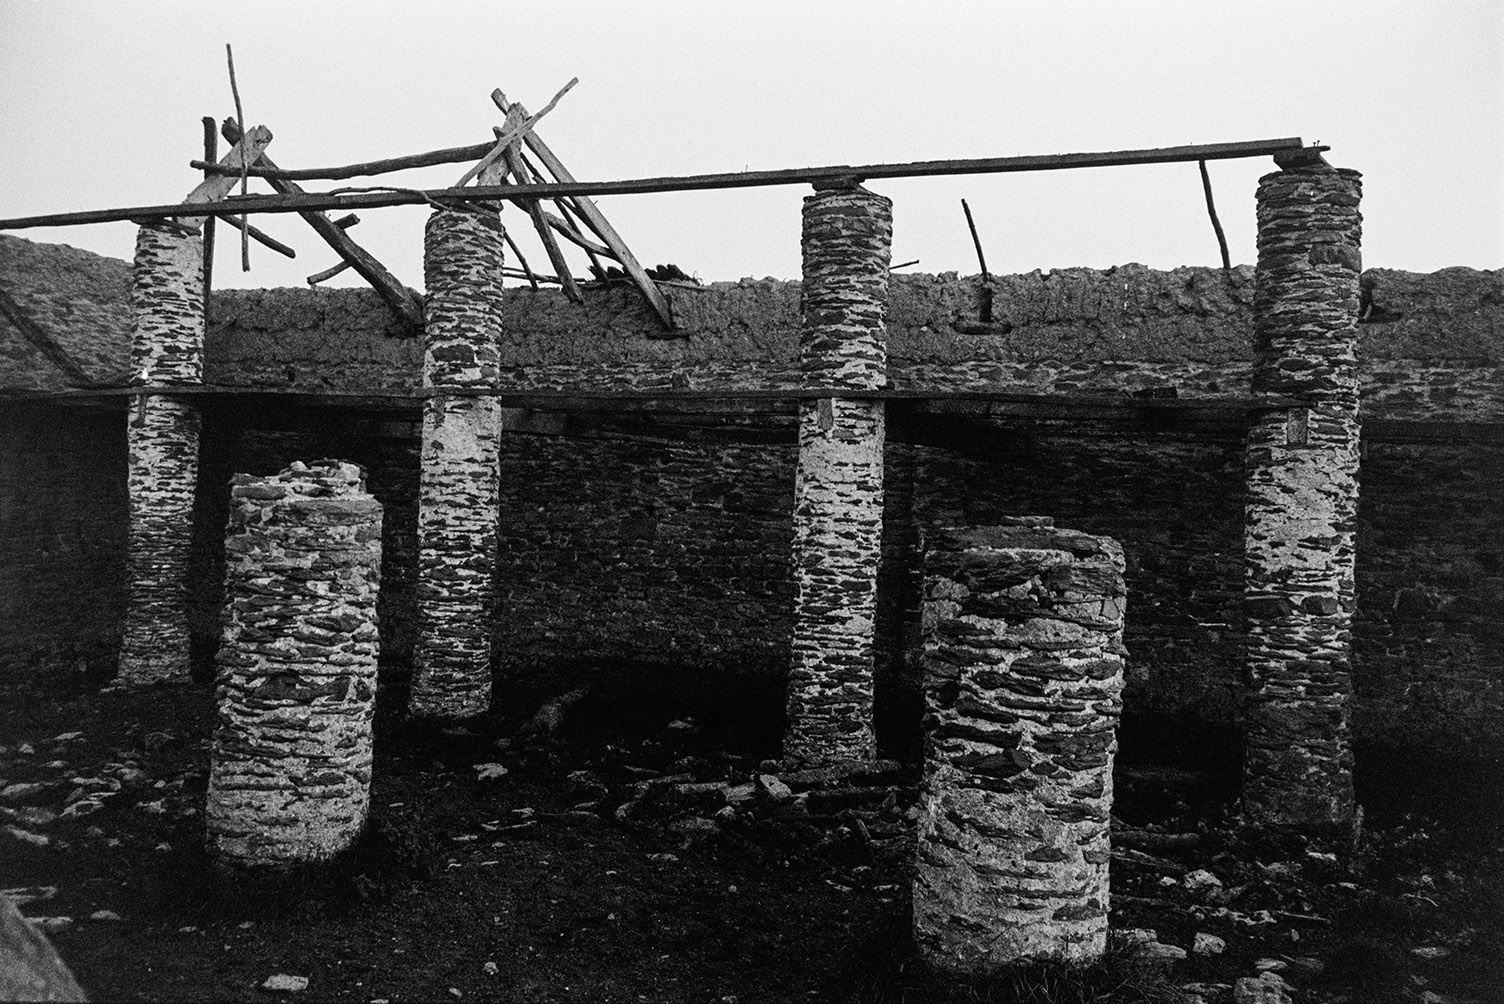 A ruined barn with collapsing stone pillars and exposed wooden roof timbers, on Braunton Burrows.